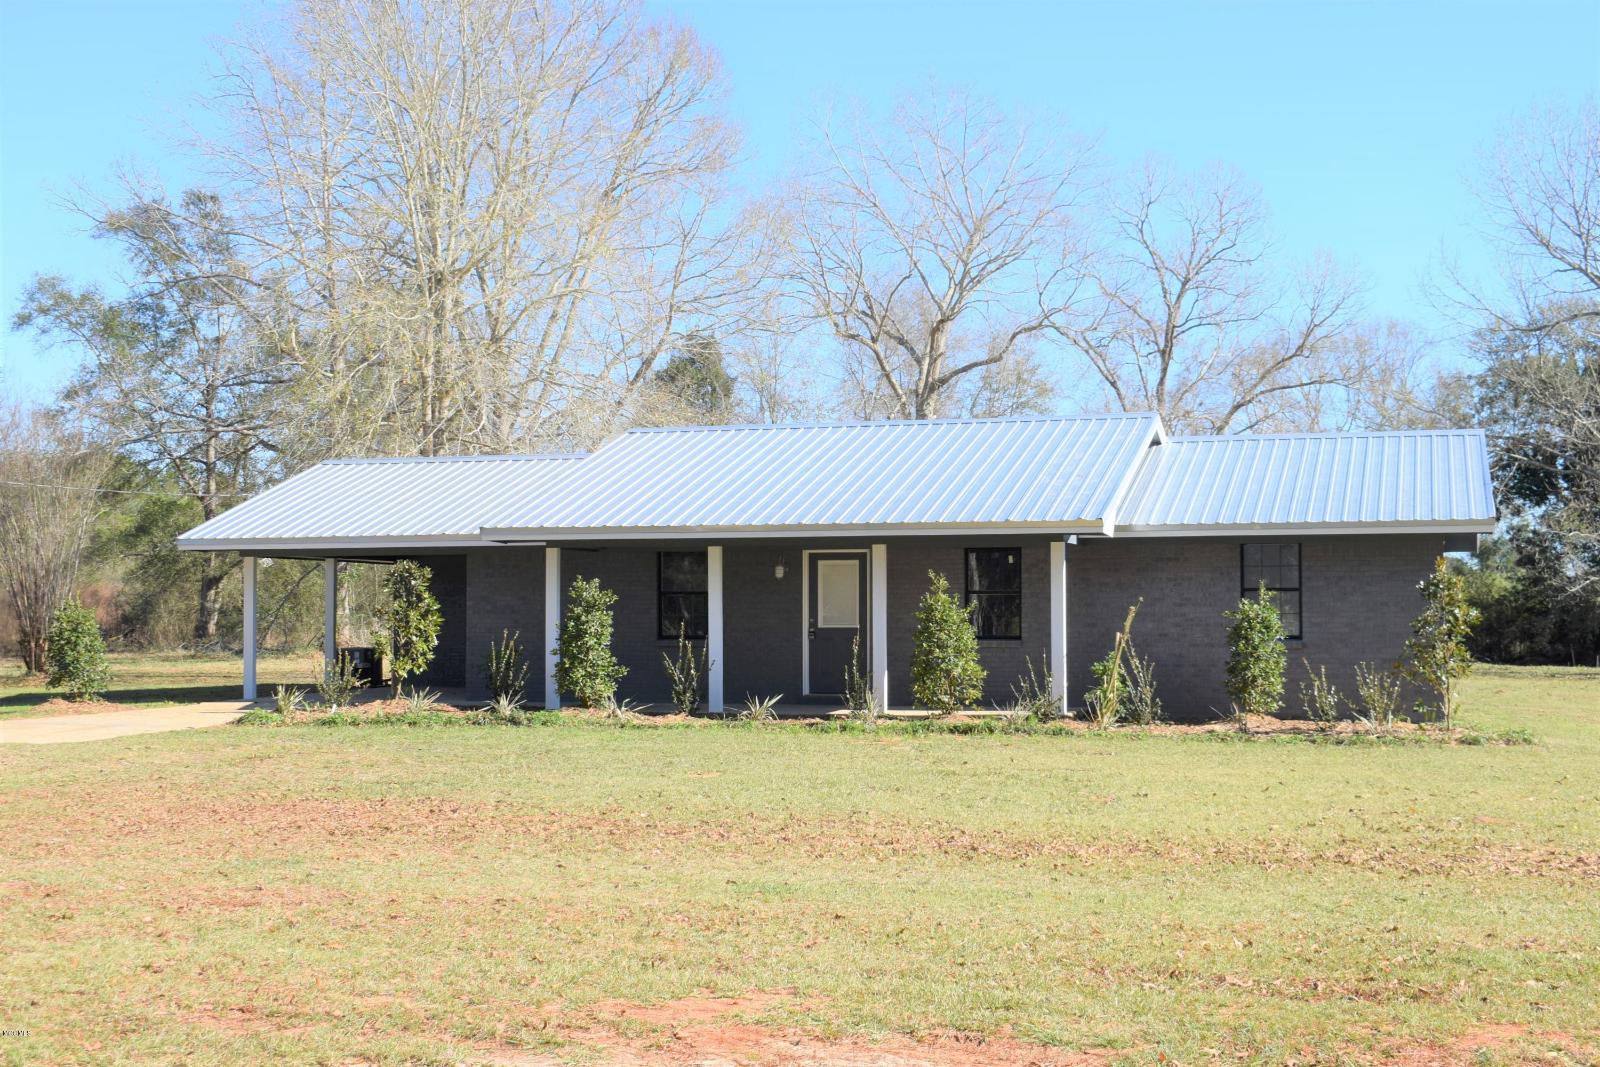 199 RICH ALLMAN DR, LUCEDALE, MS — Better Homes and Gardens ® Real Estate